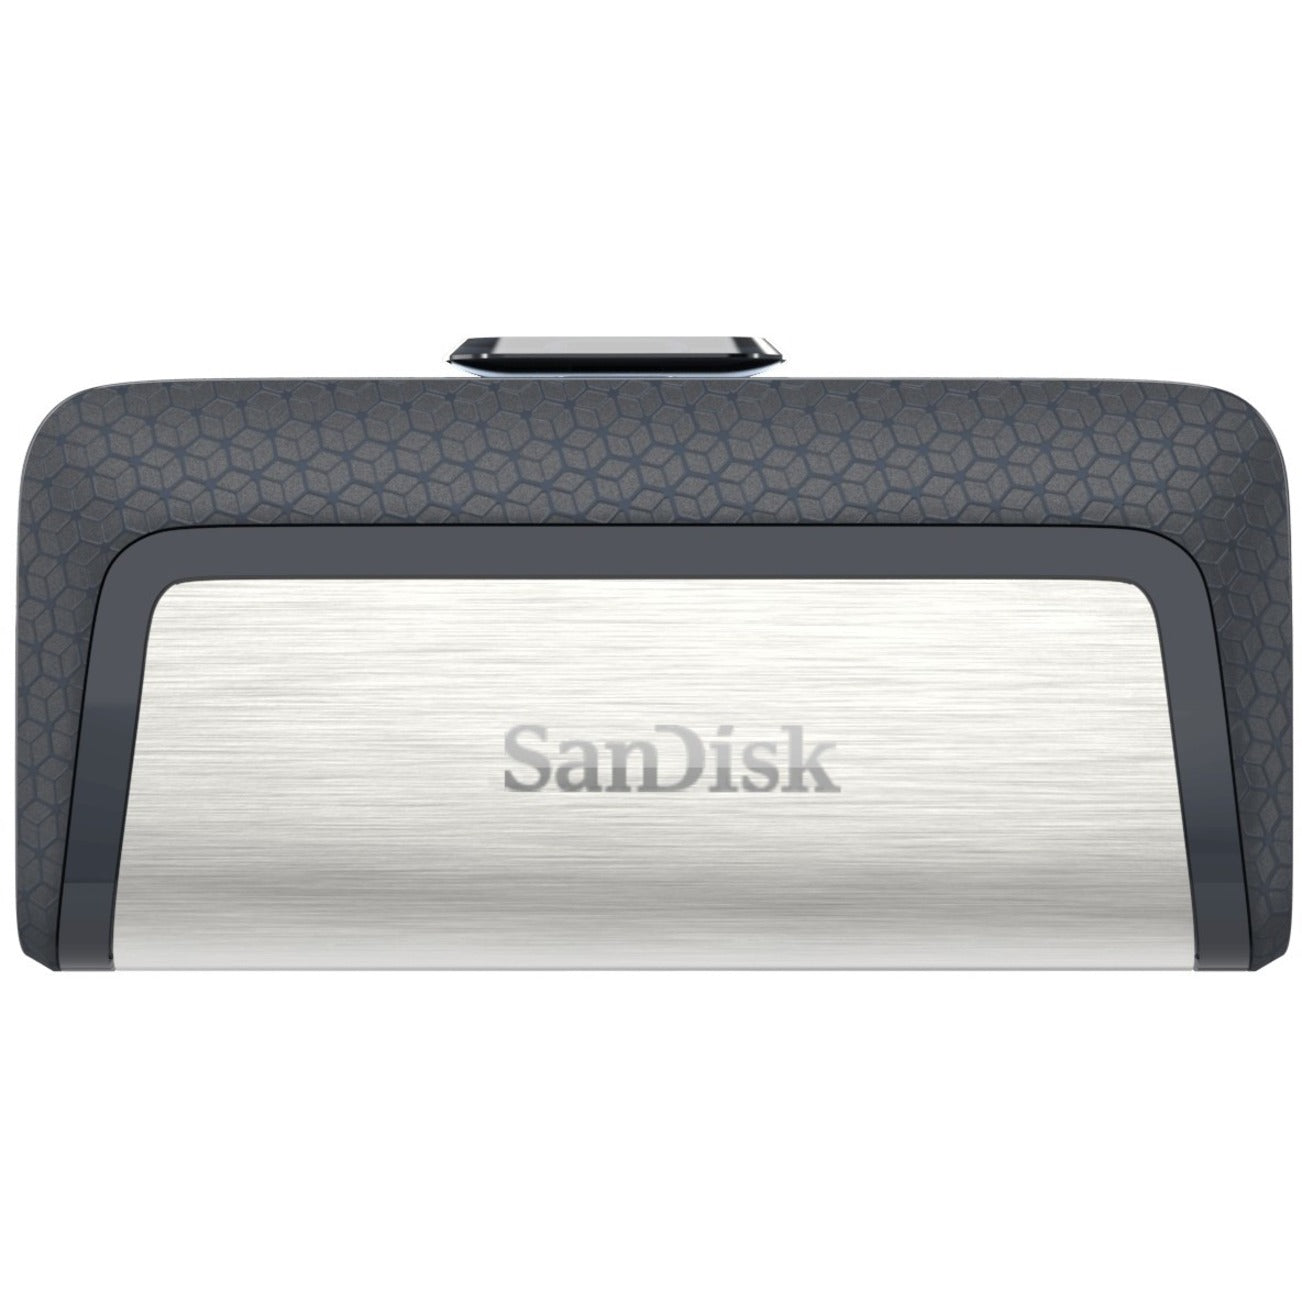 SanDisk SDDDC2-032G-A46 Ultra Dual Drive USB TYPE-C - 32GB, High-Speed Data Transfer and Easy File Management